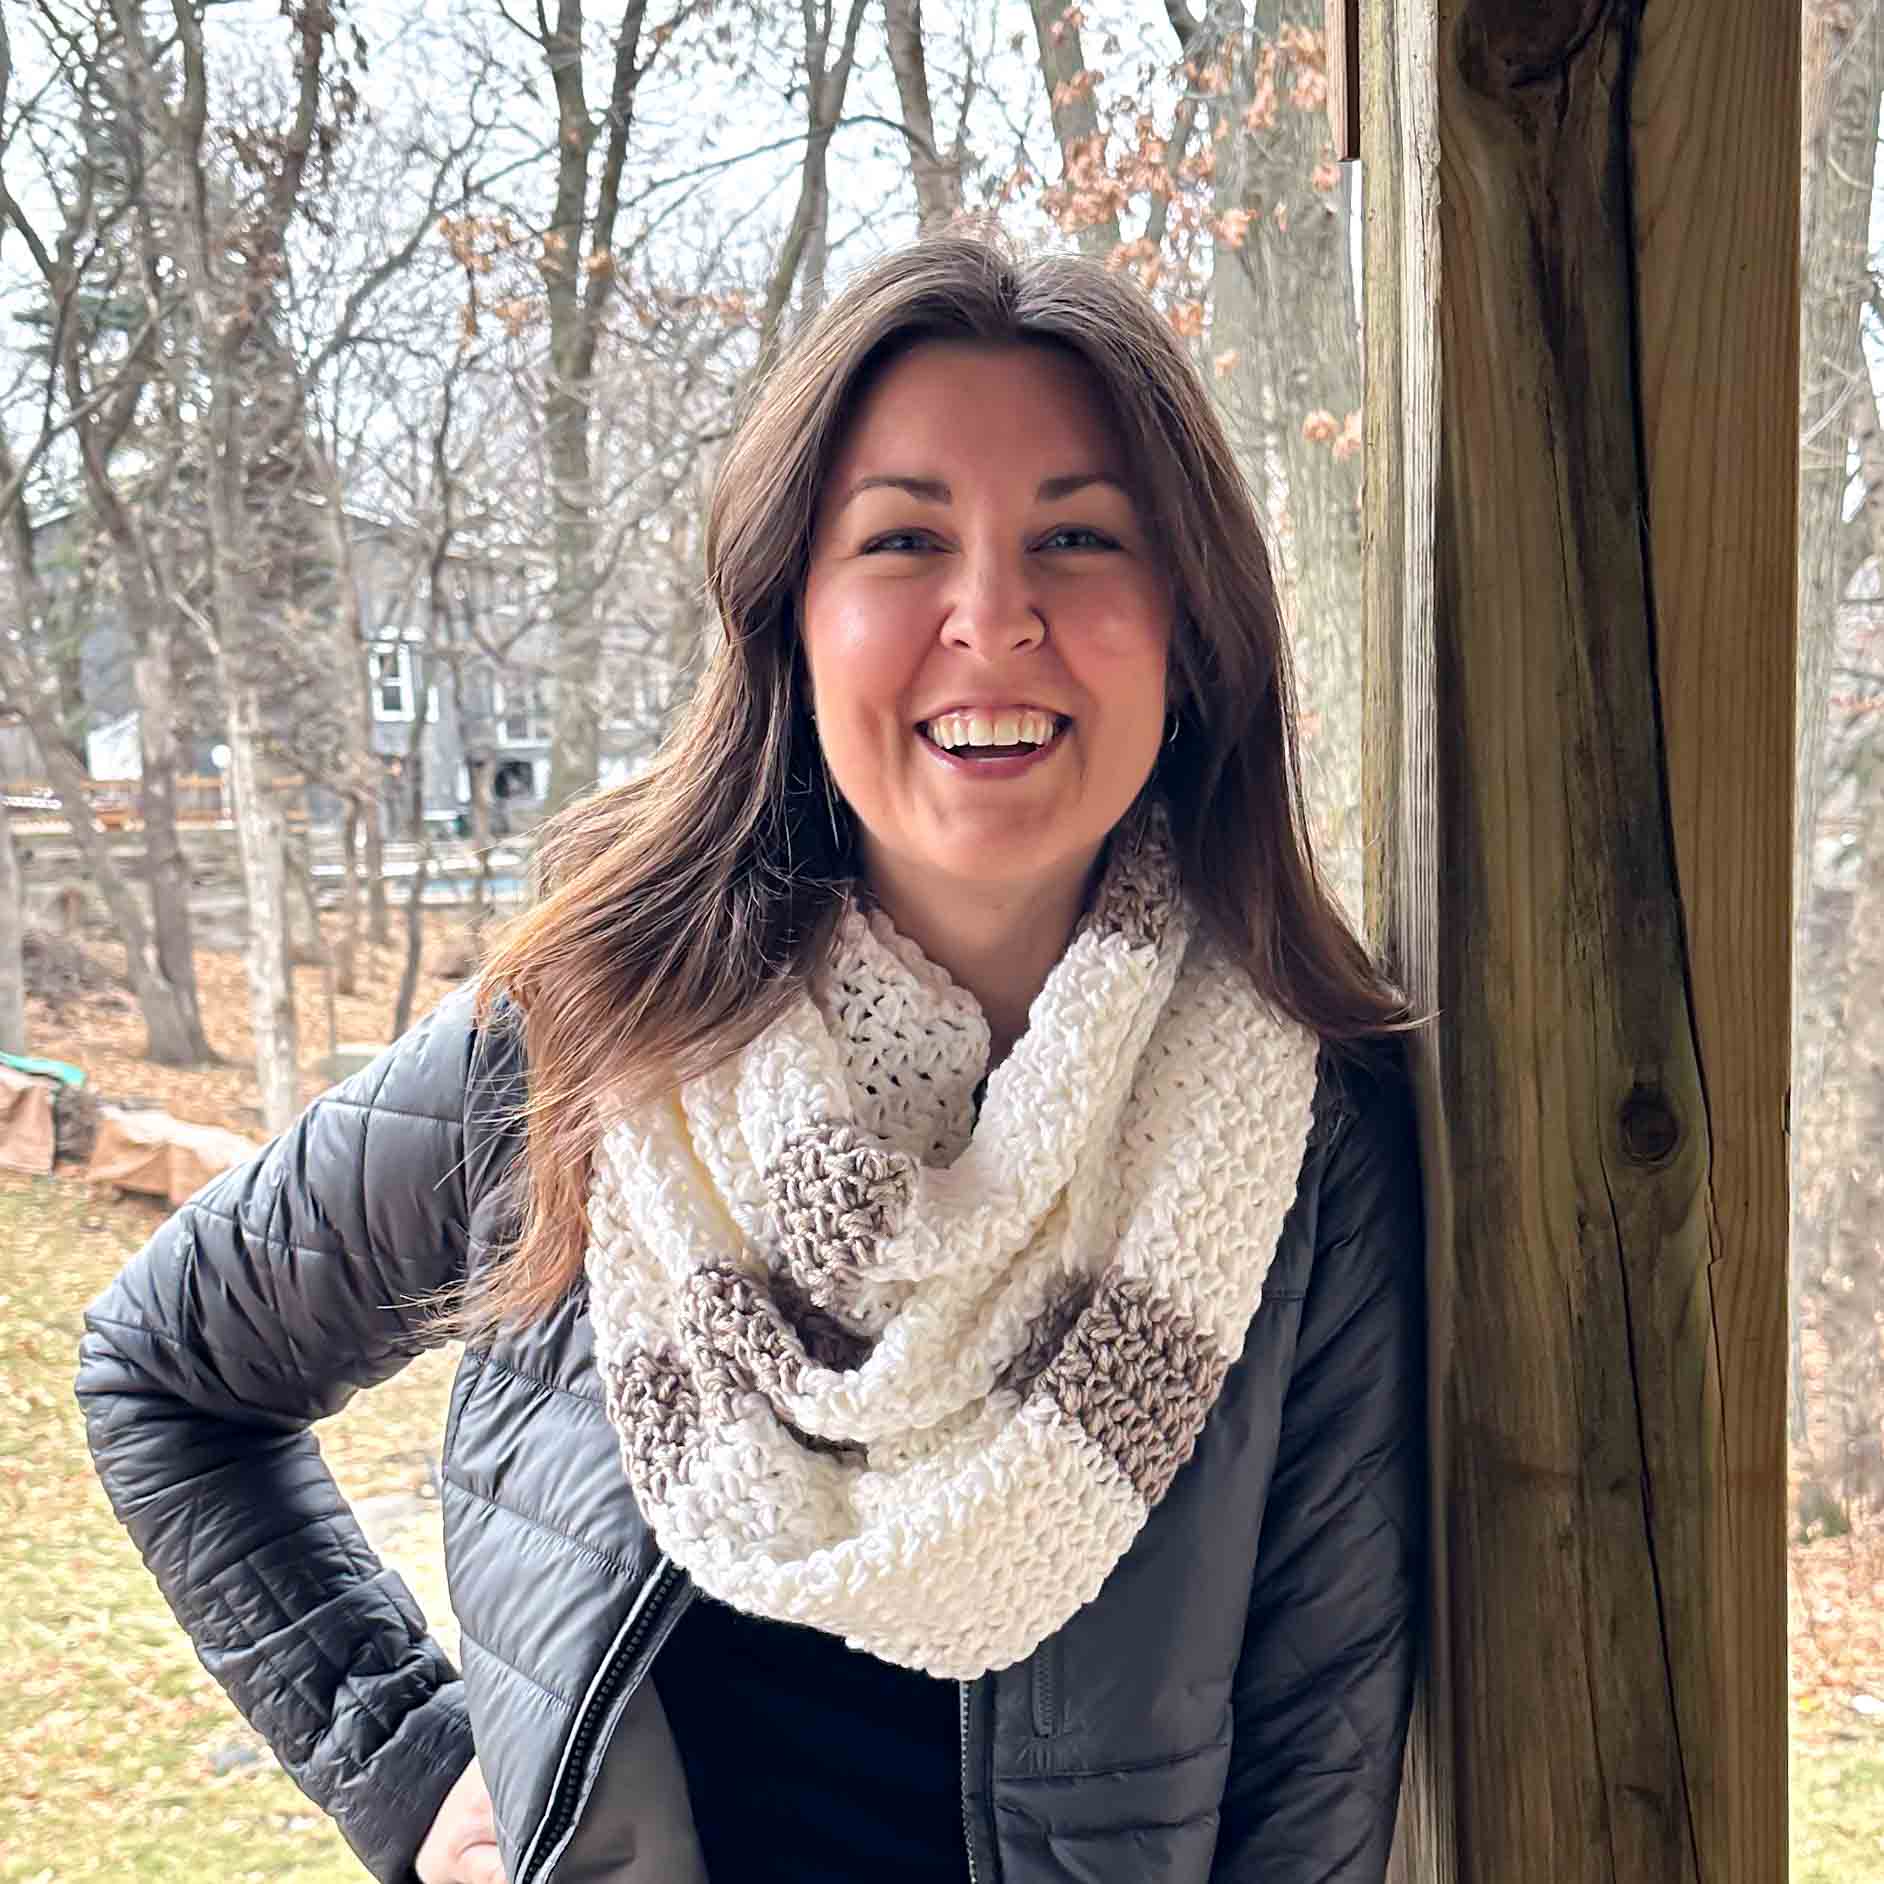 woman wearing a white and tan striped crochet scarf while leaning against beam